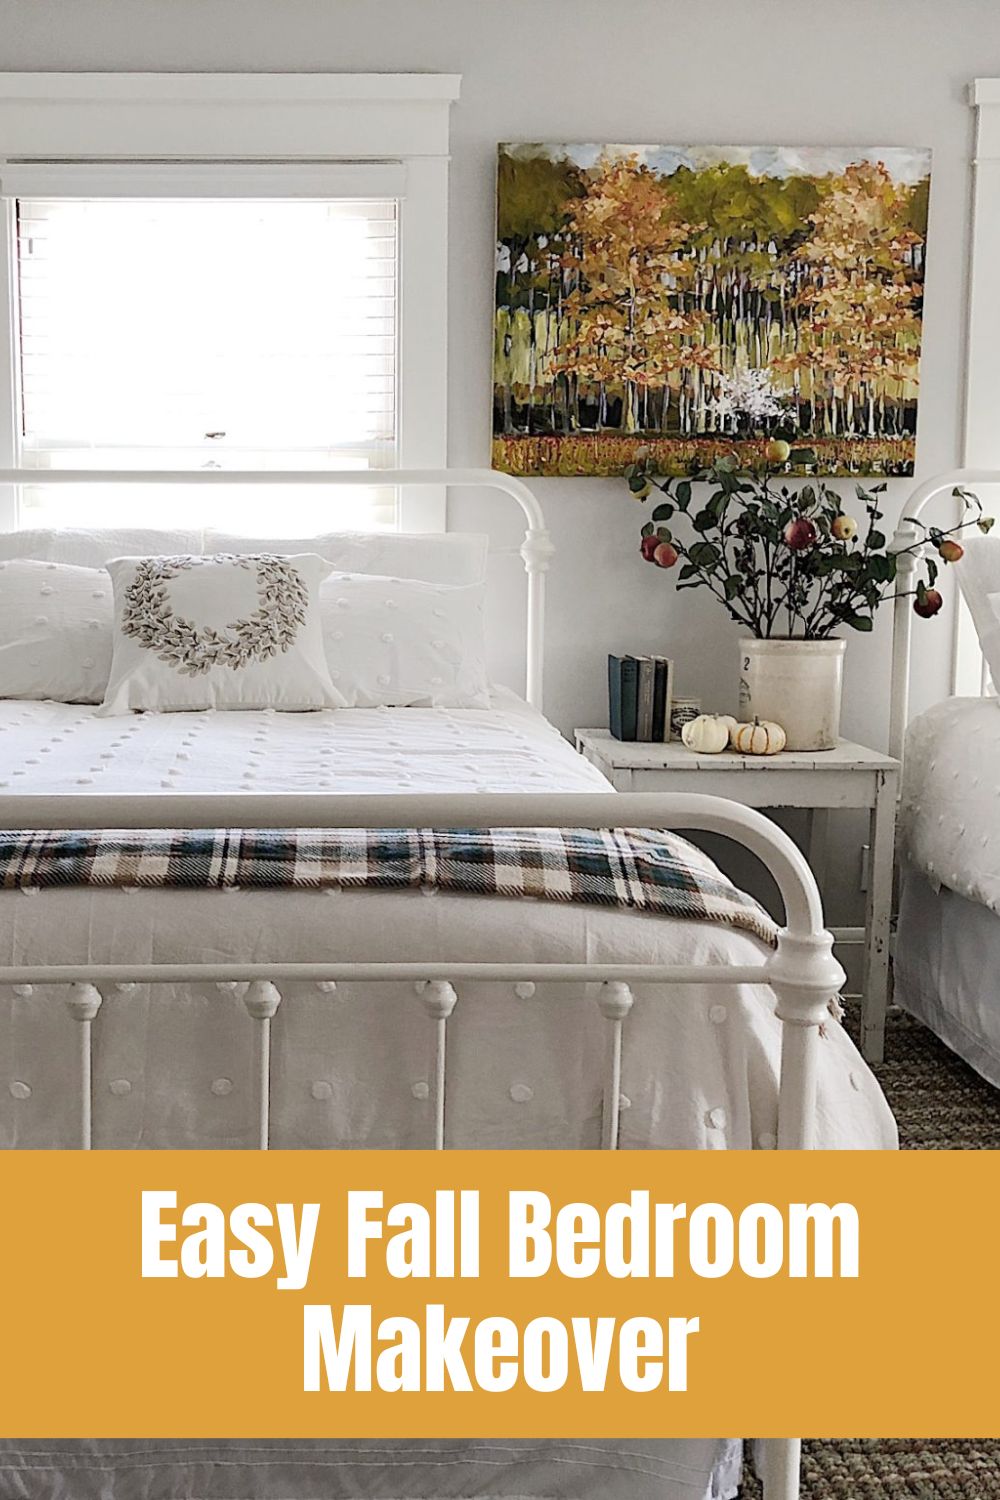 This was a very dramatic and easy fall bedroom makeover. A few easy changes and it looks like a new room. The end result was amazing!